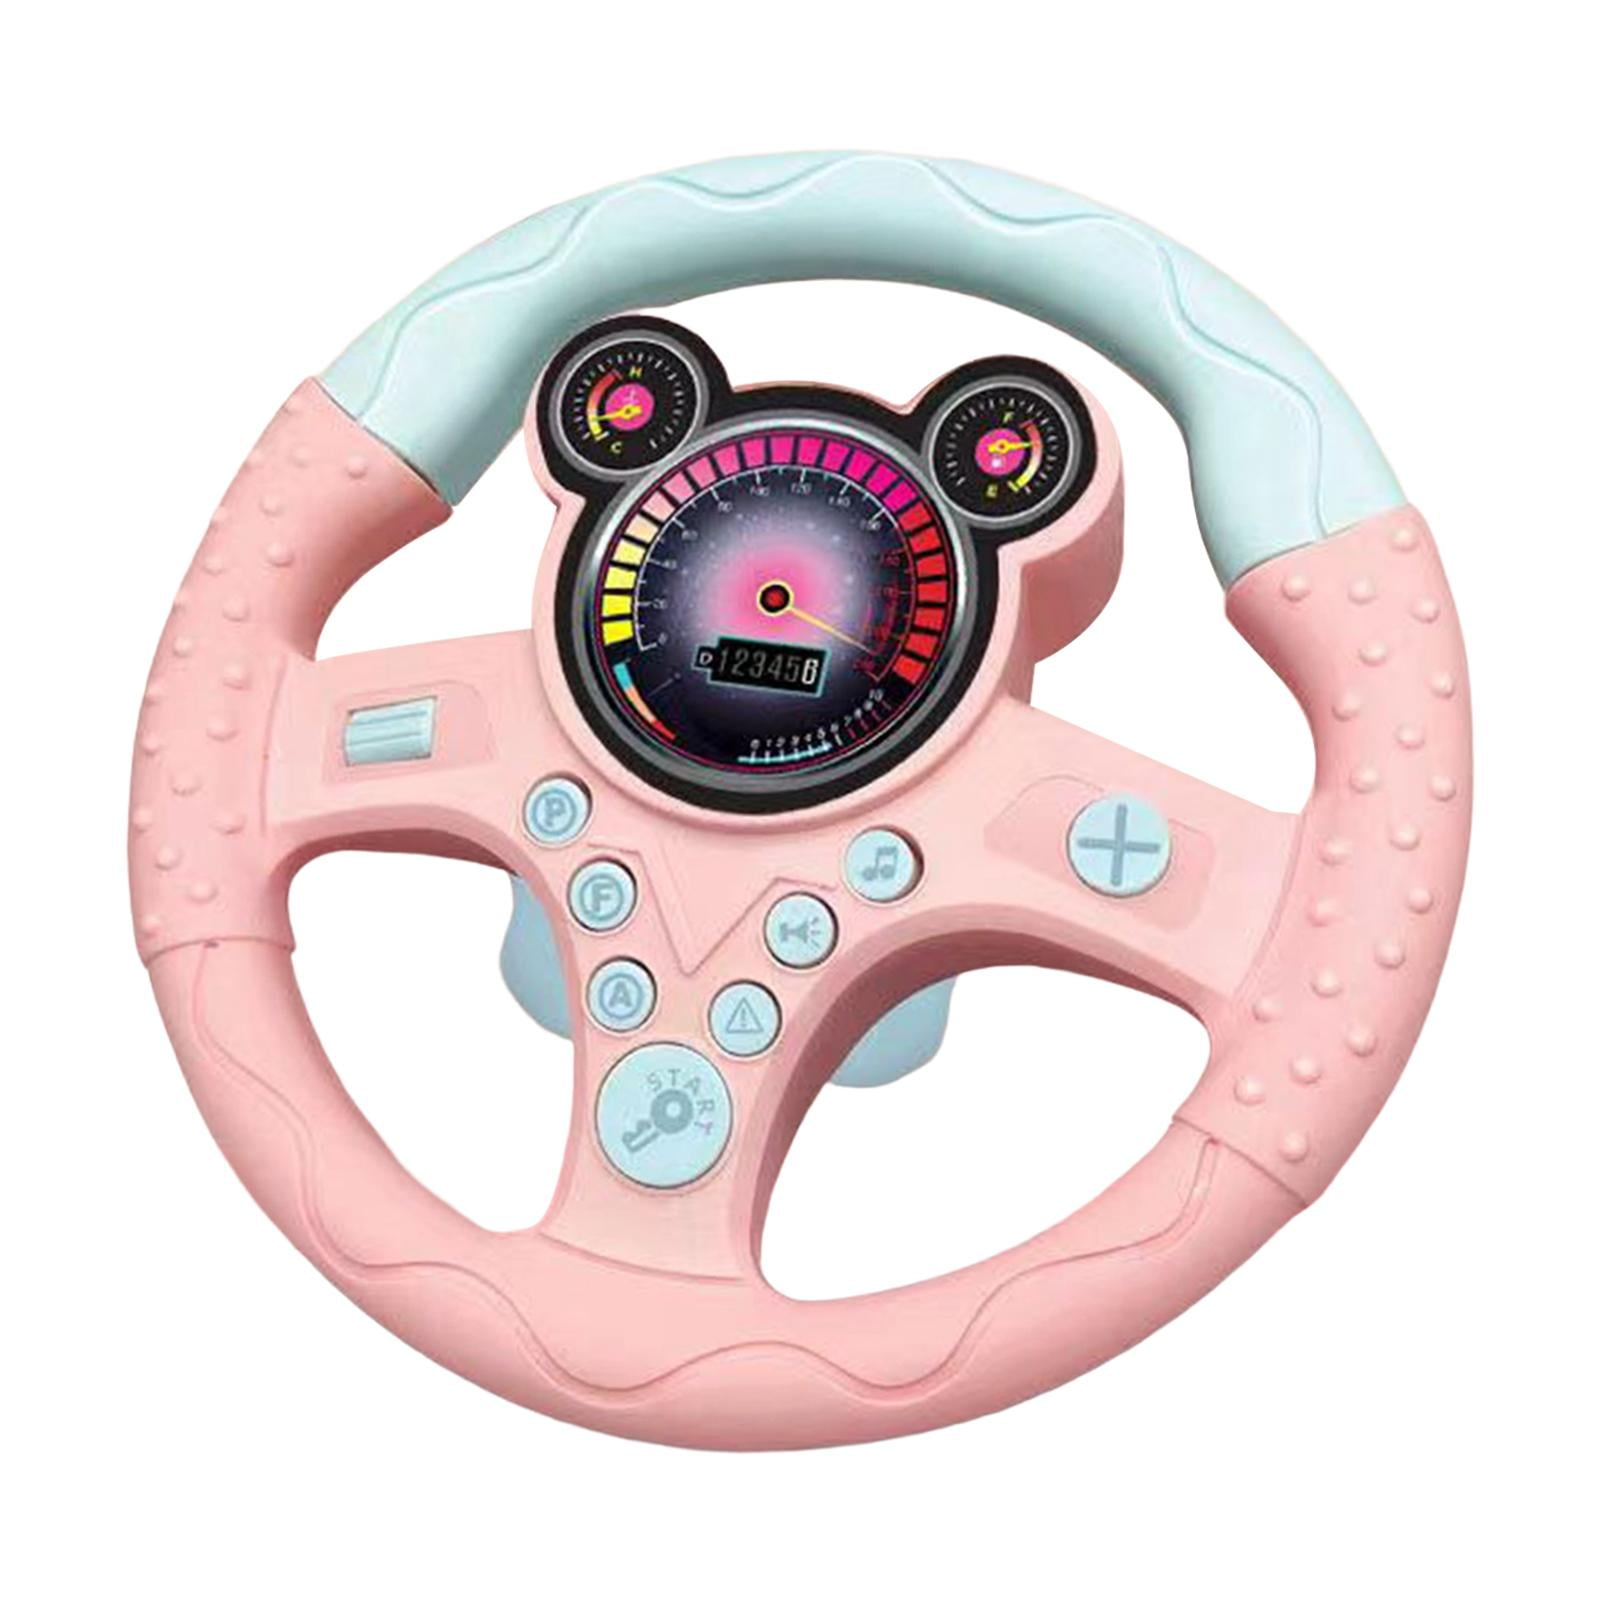  XHSP Steering Wheel Toy with Lights Music, Simulated Driving  for Toddlers Pretend Play Toy Adsorption Driving Wheel for Kids (Style 2) :  Toys & Games